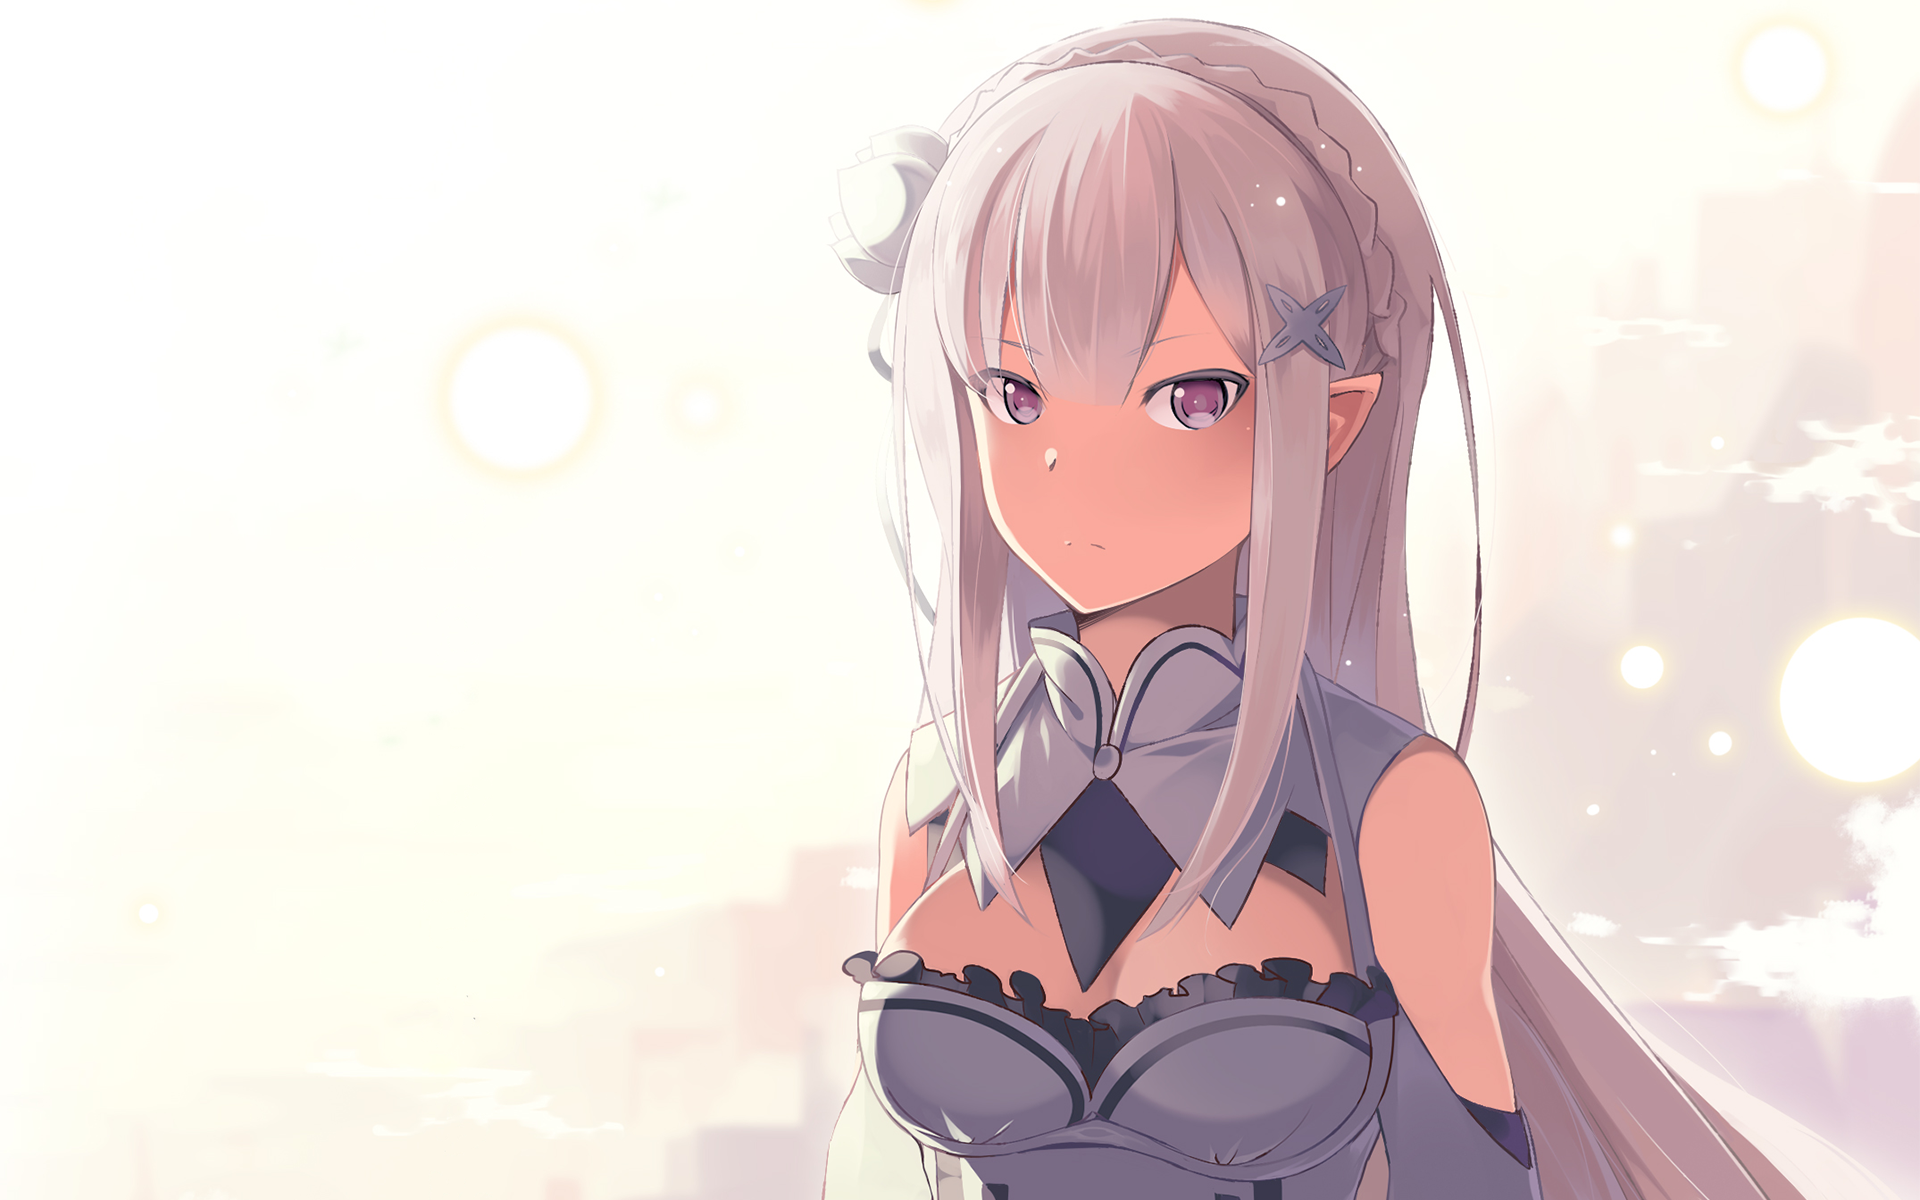 Anime Re:ZERO -Starting Life in Another World- Wallpaper